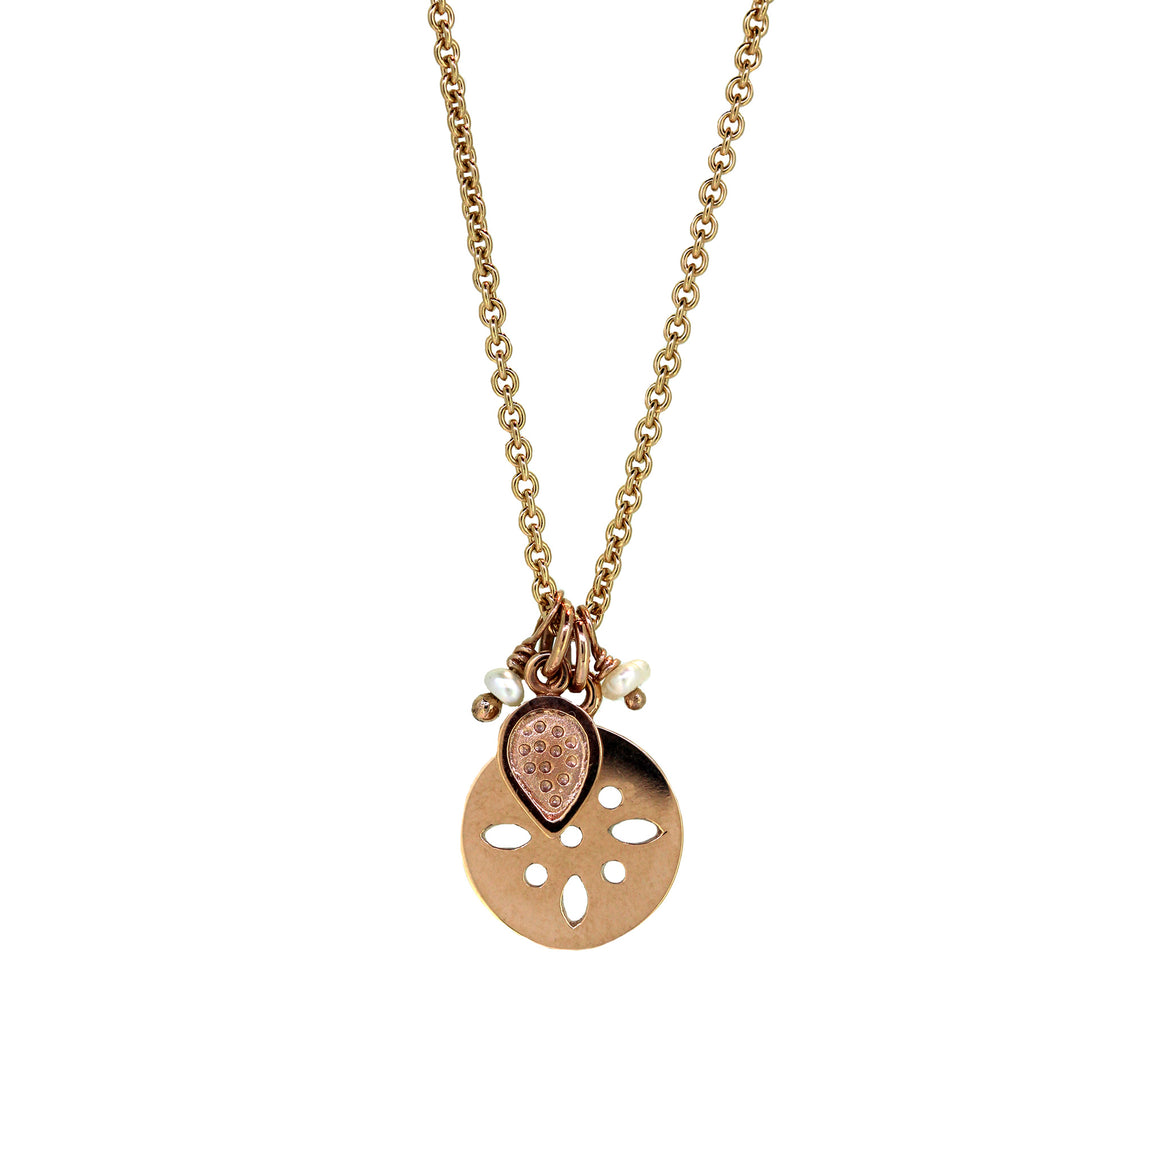 Rose gold tree of life necklace with freshwater seed pearls